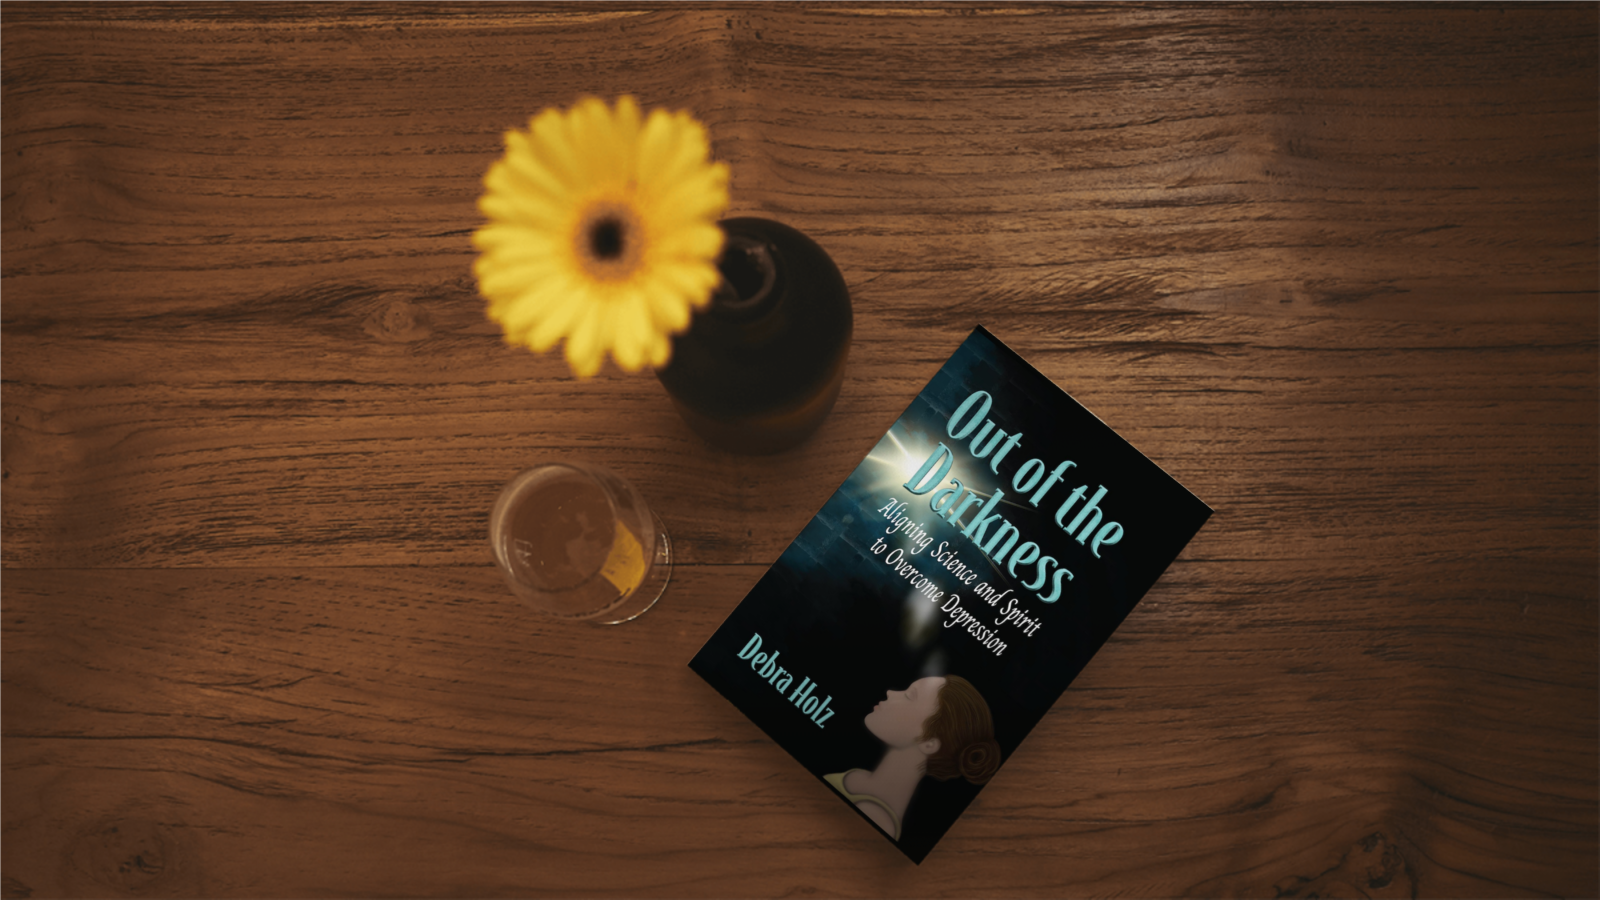 Out of the Darkness by Debra Holz